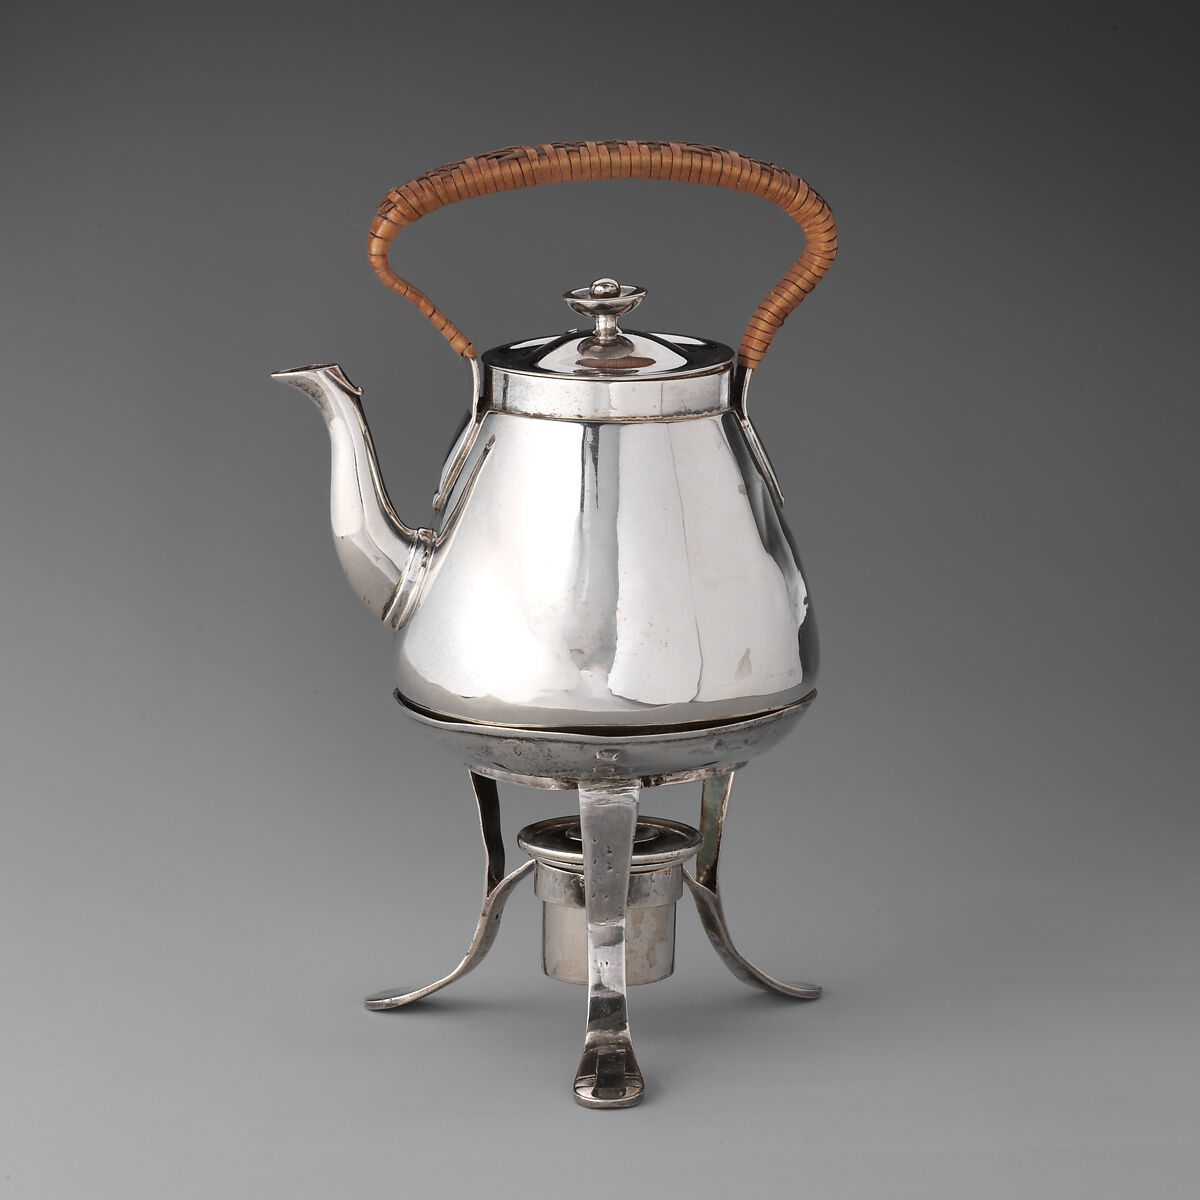 Miniature kettle with stand, W. H., Silver, wicker, British, London 